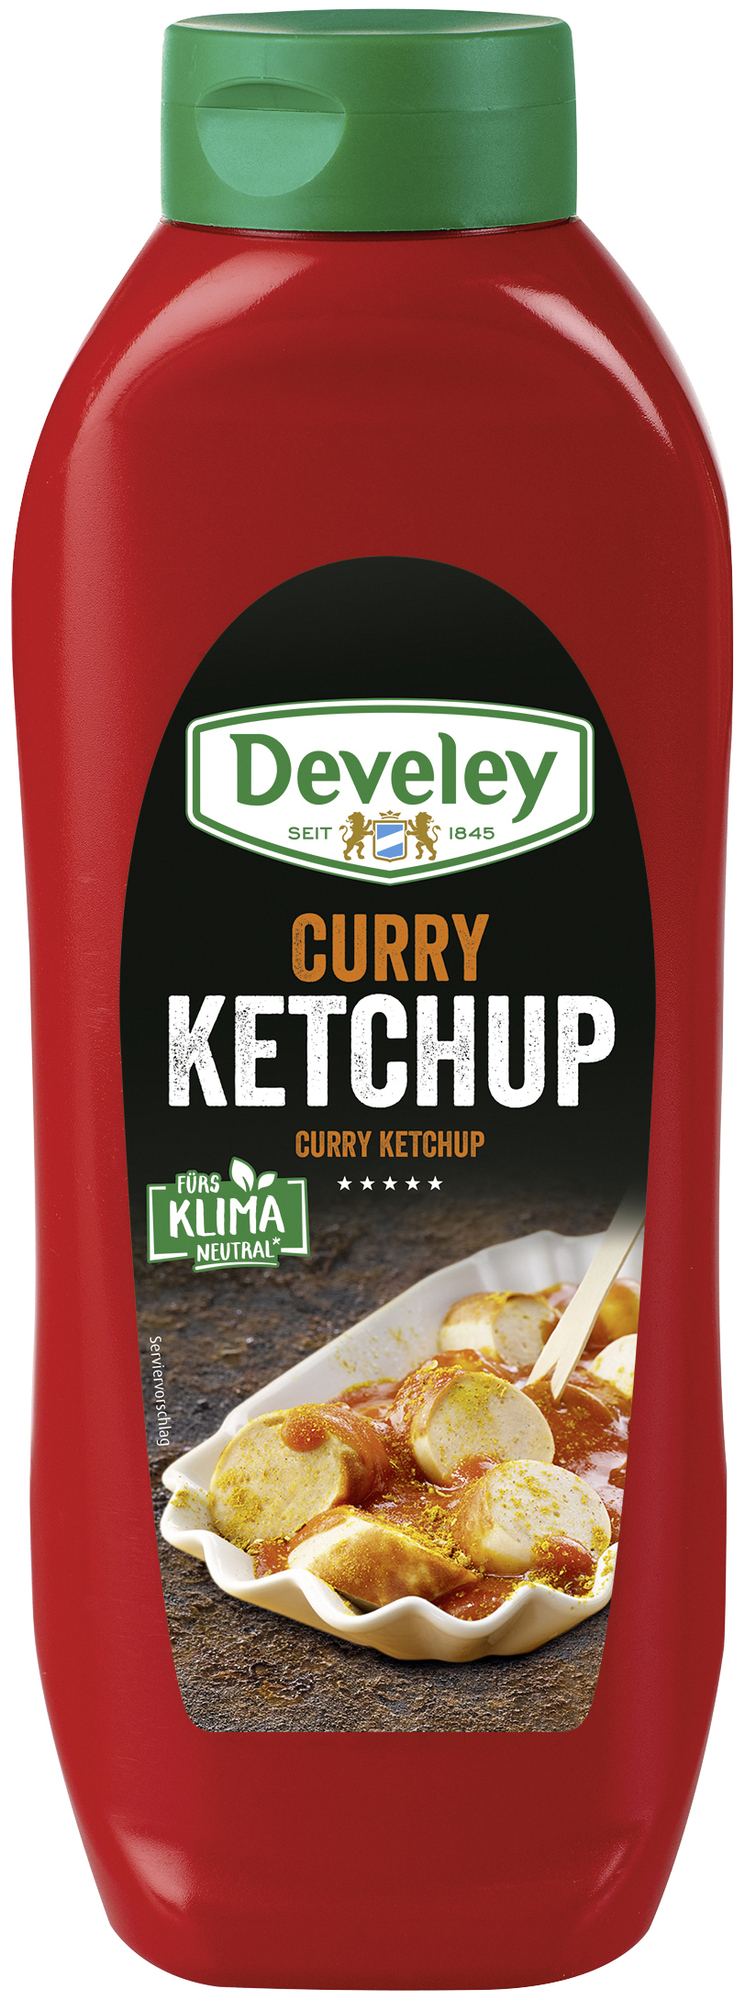 Curry Ketchup 875ml